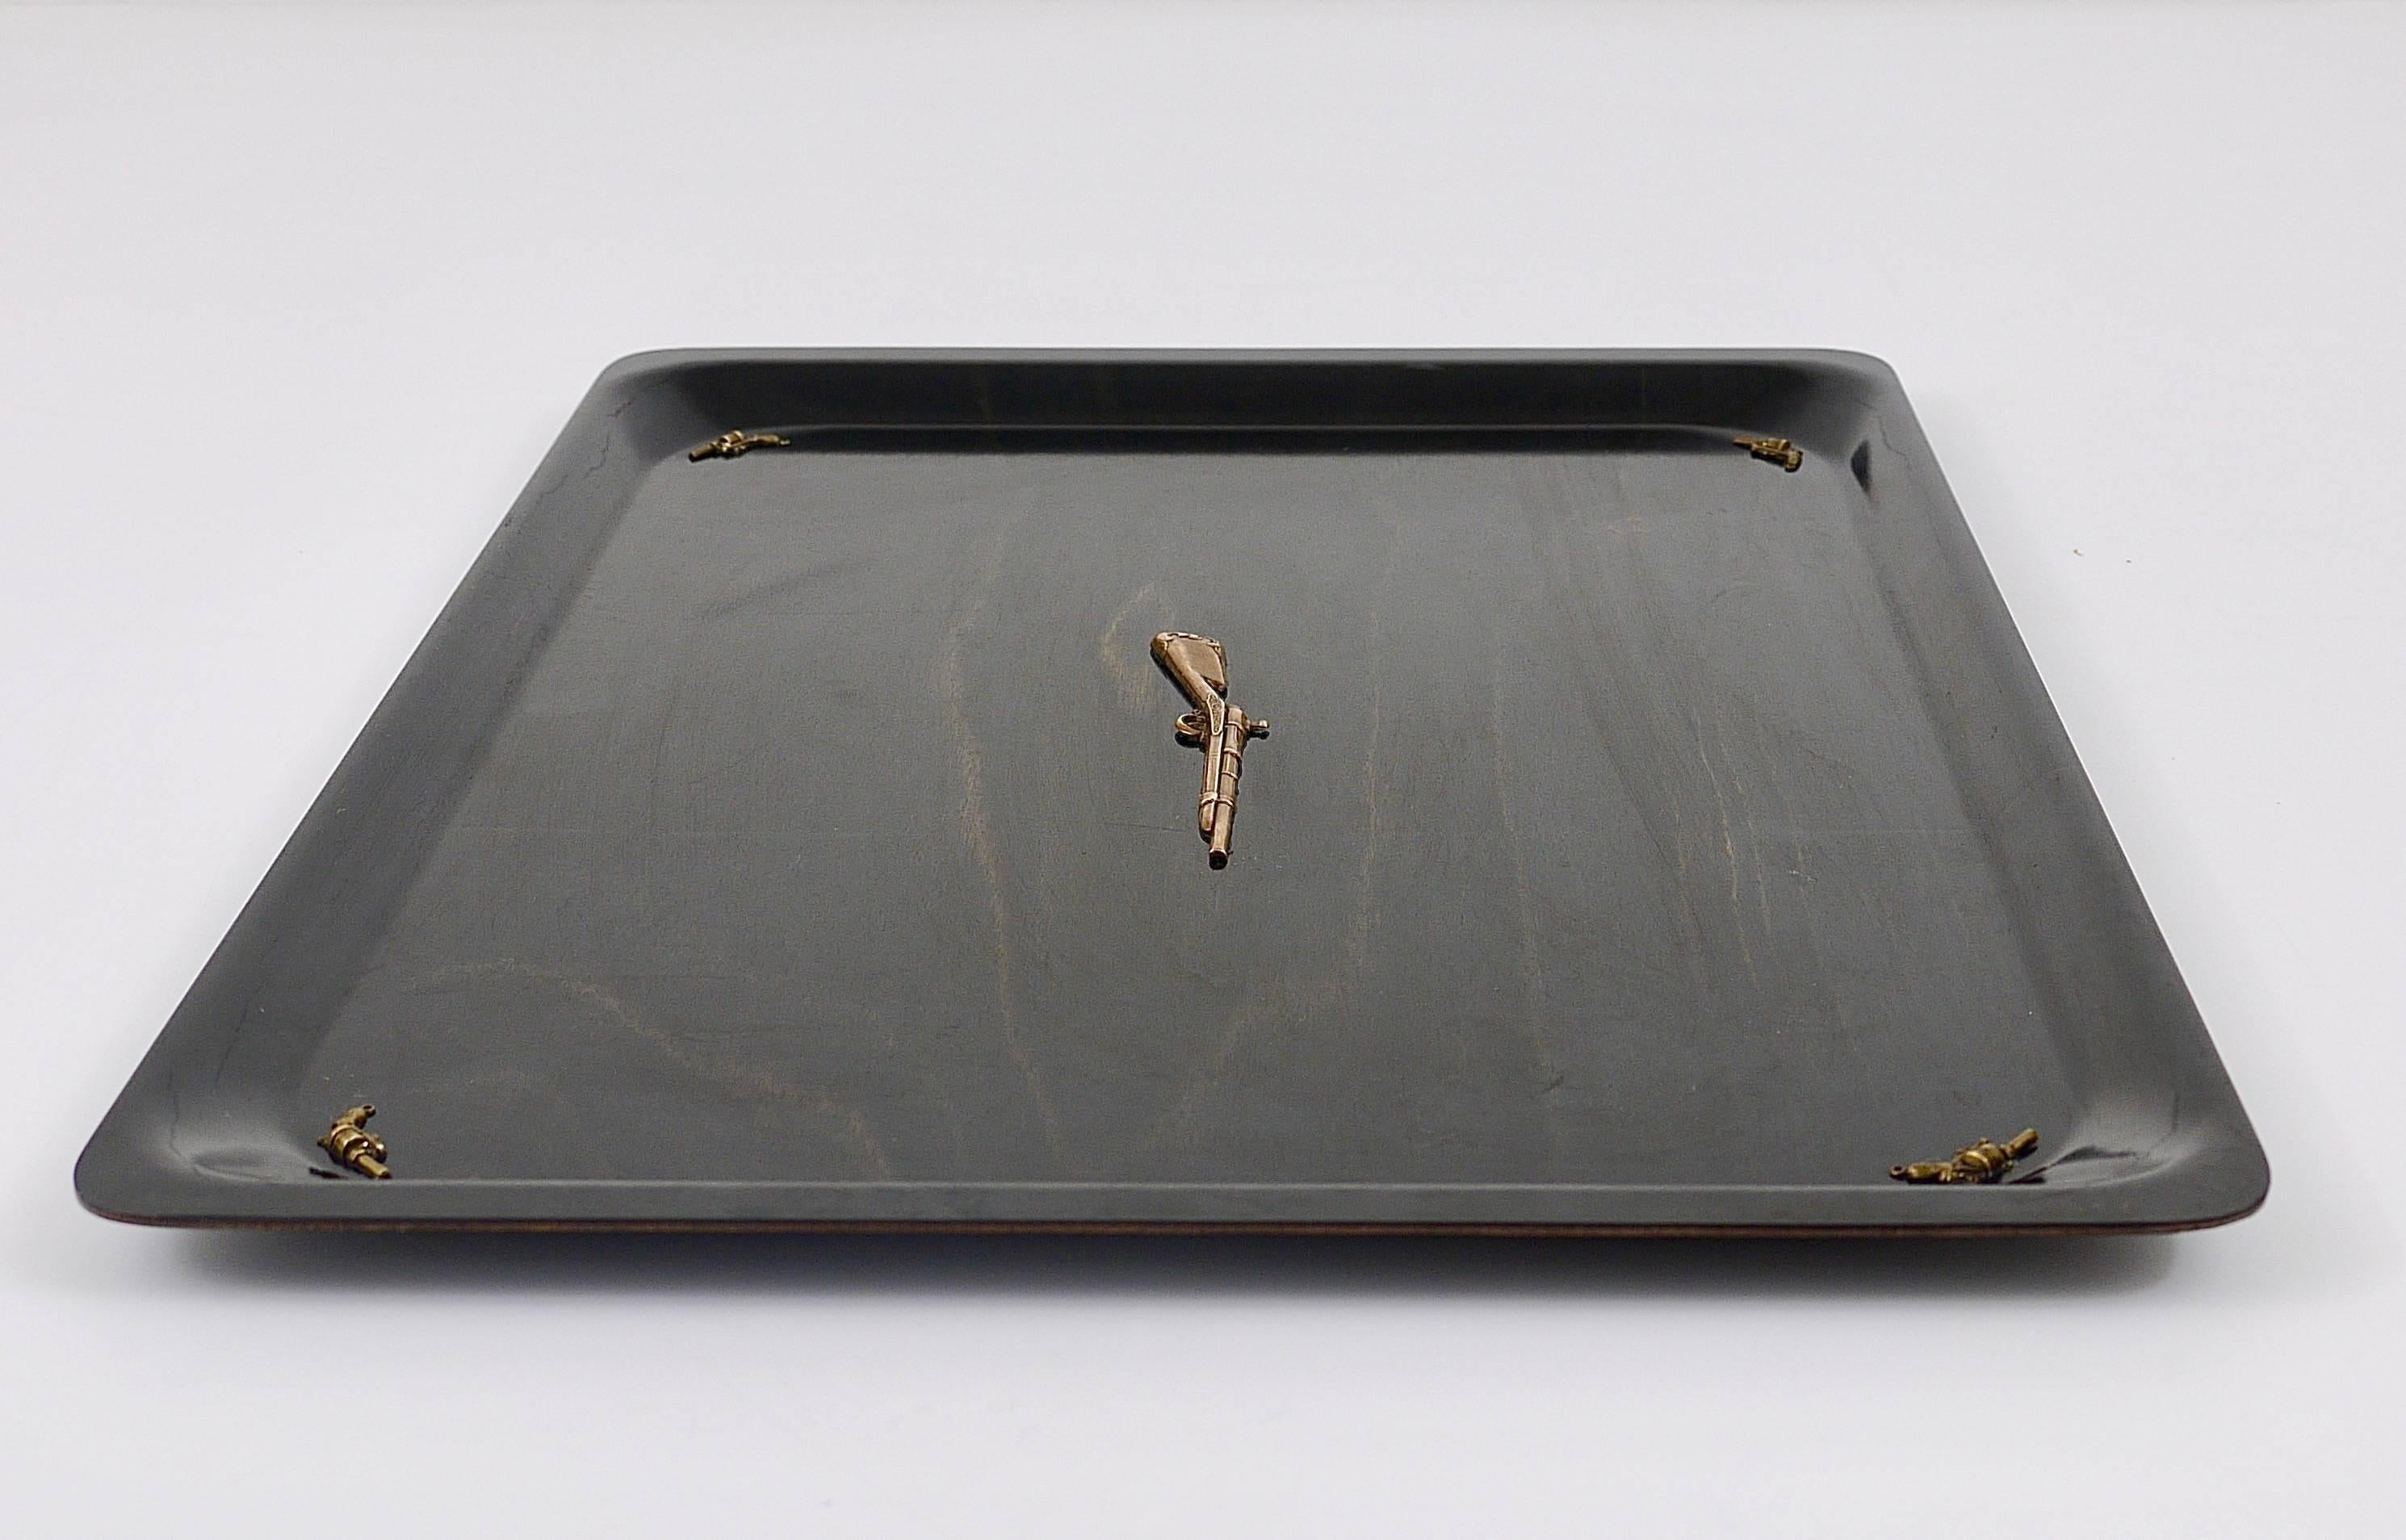 Brass Black Colt and Rifle Serving Tray, Piero Fornasetti Style, Italy, 1960s